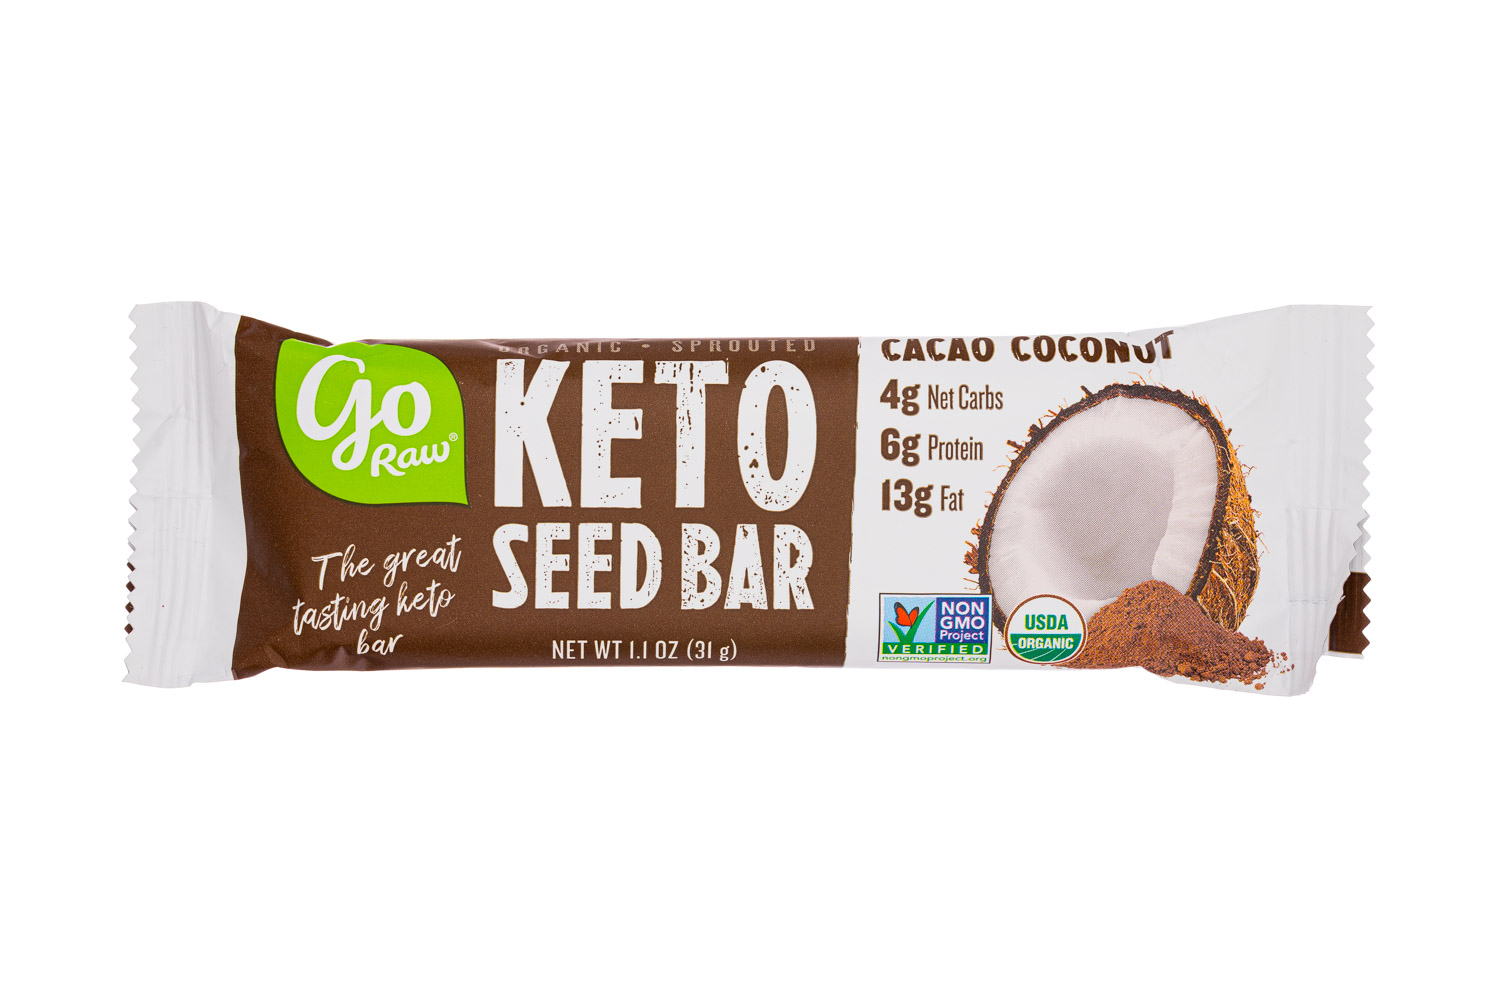 Sprouted Keto Seed Bar: Cacao Coconut